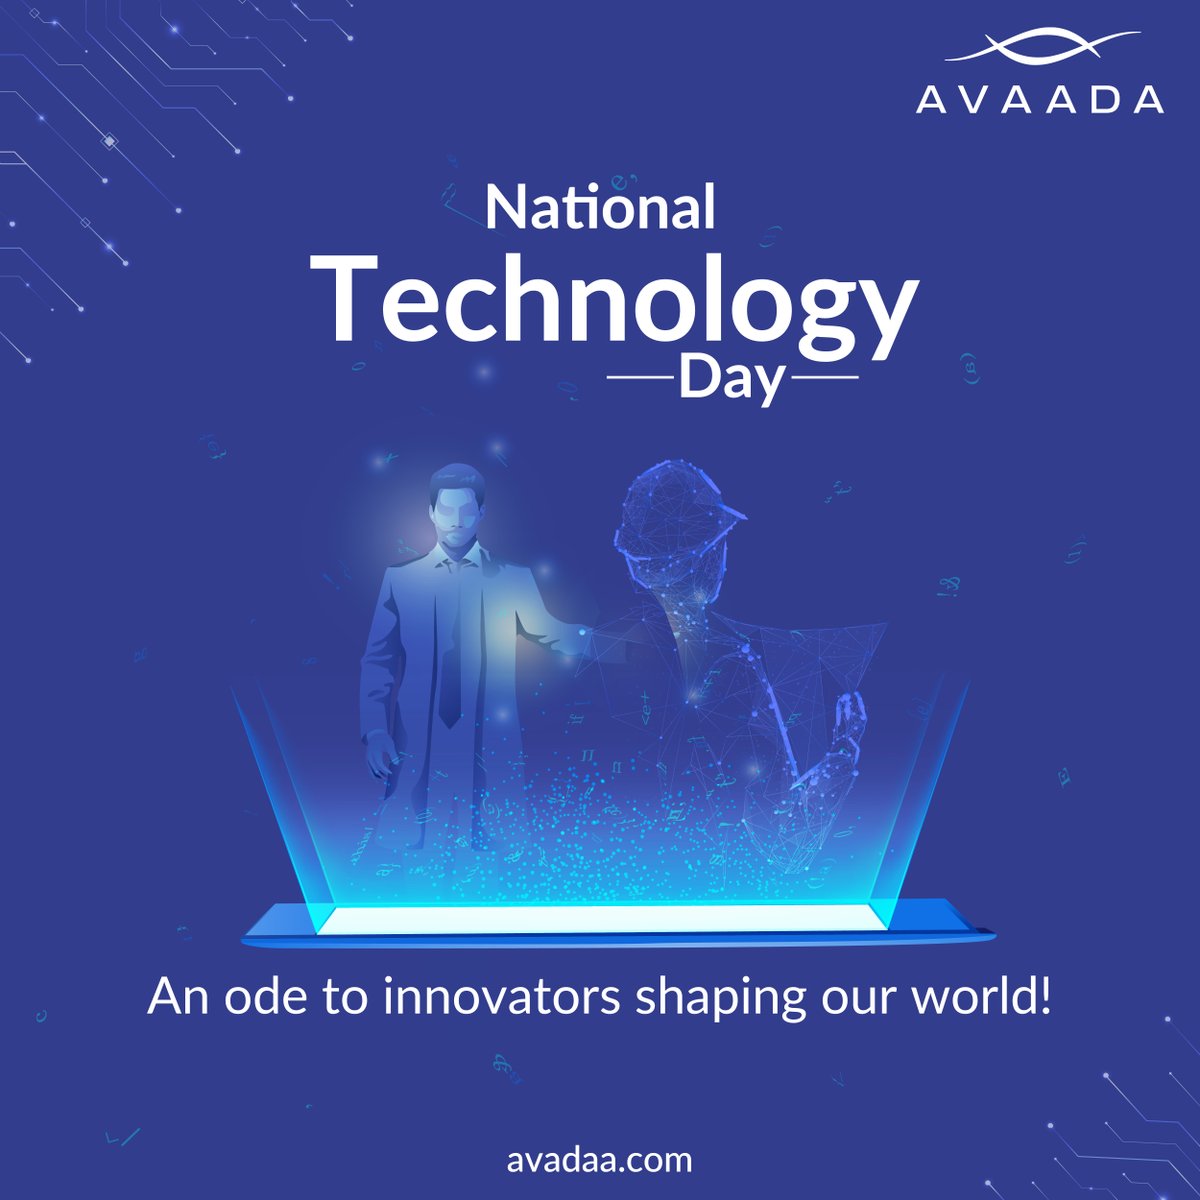 Our gratitude to the engineers, scientists, and visionaries driving innovation and progress this National Technology Day.

#NationalTechnologyDay #TechForGood #Innovation #CleanEnergy #AvaadaGroup